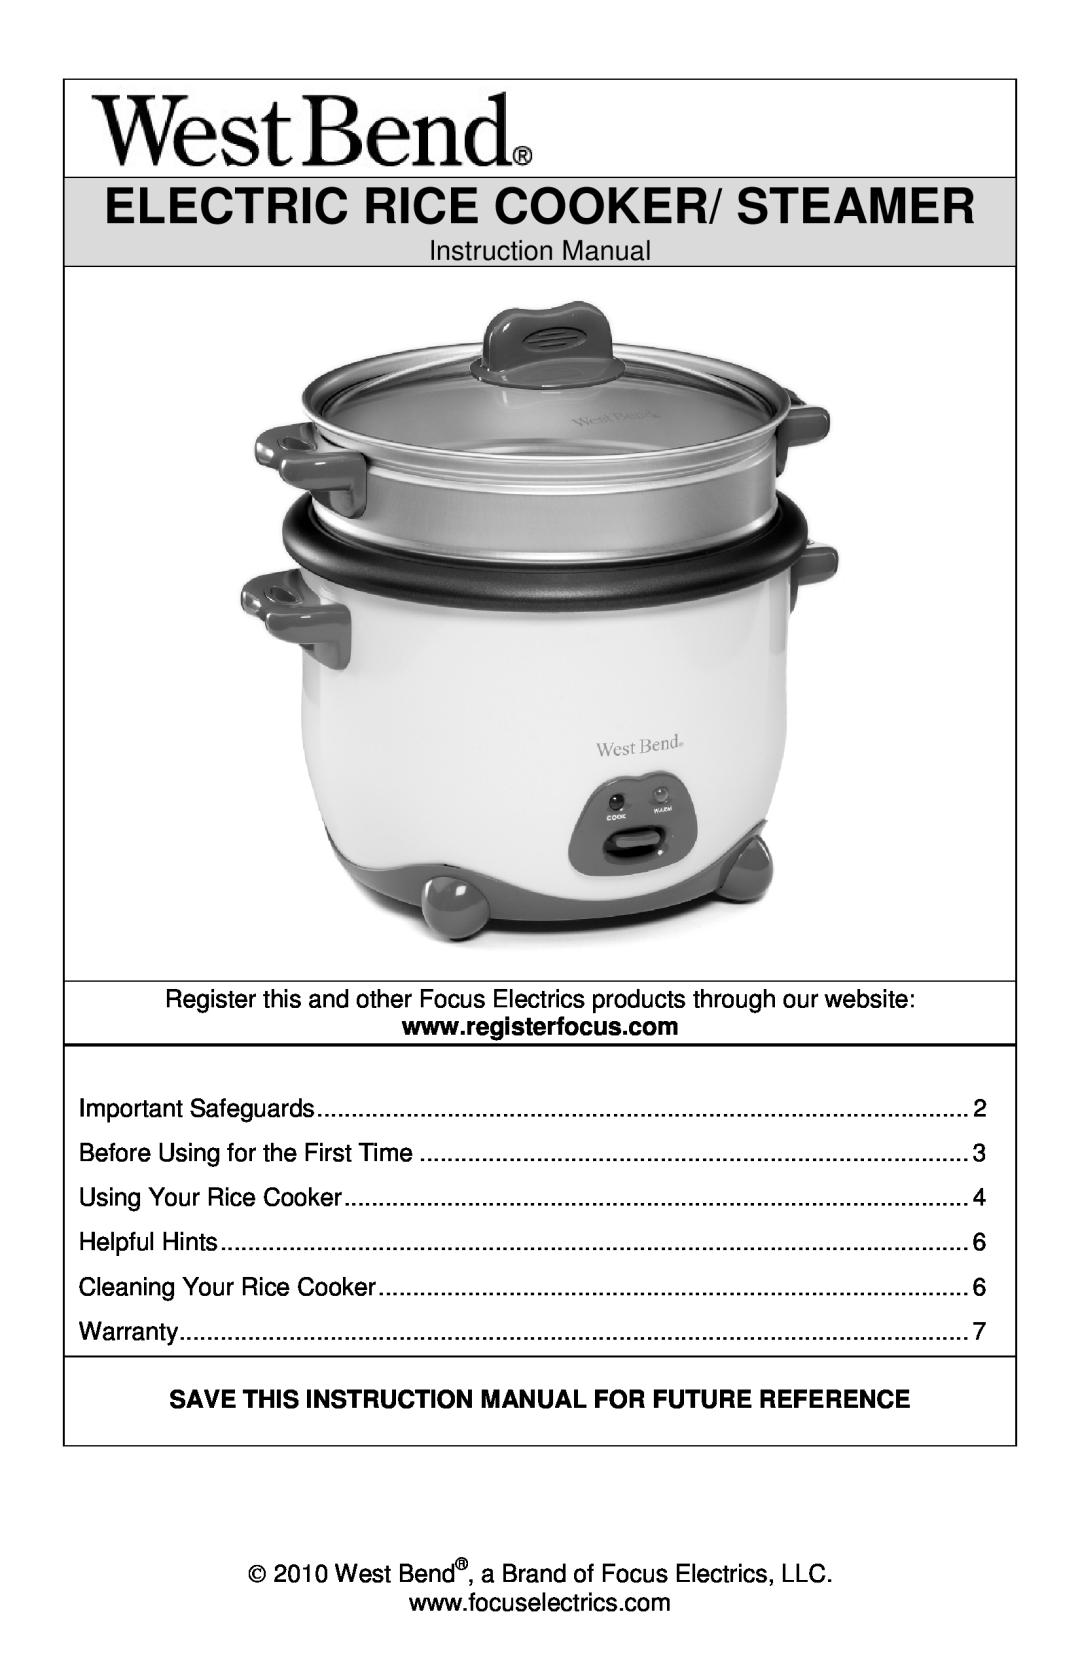 West Bend 88010, L5808 instruction manual Electric Rice Cooker/ Steamer 